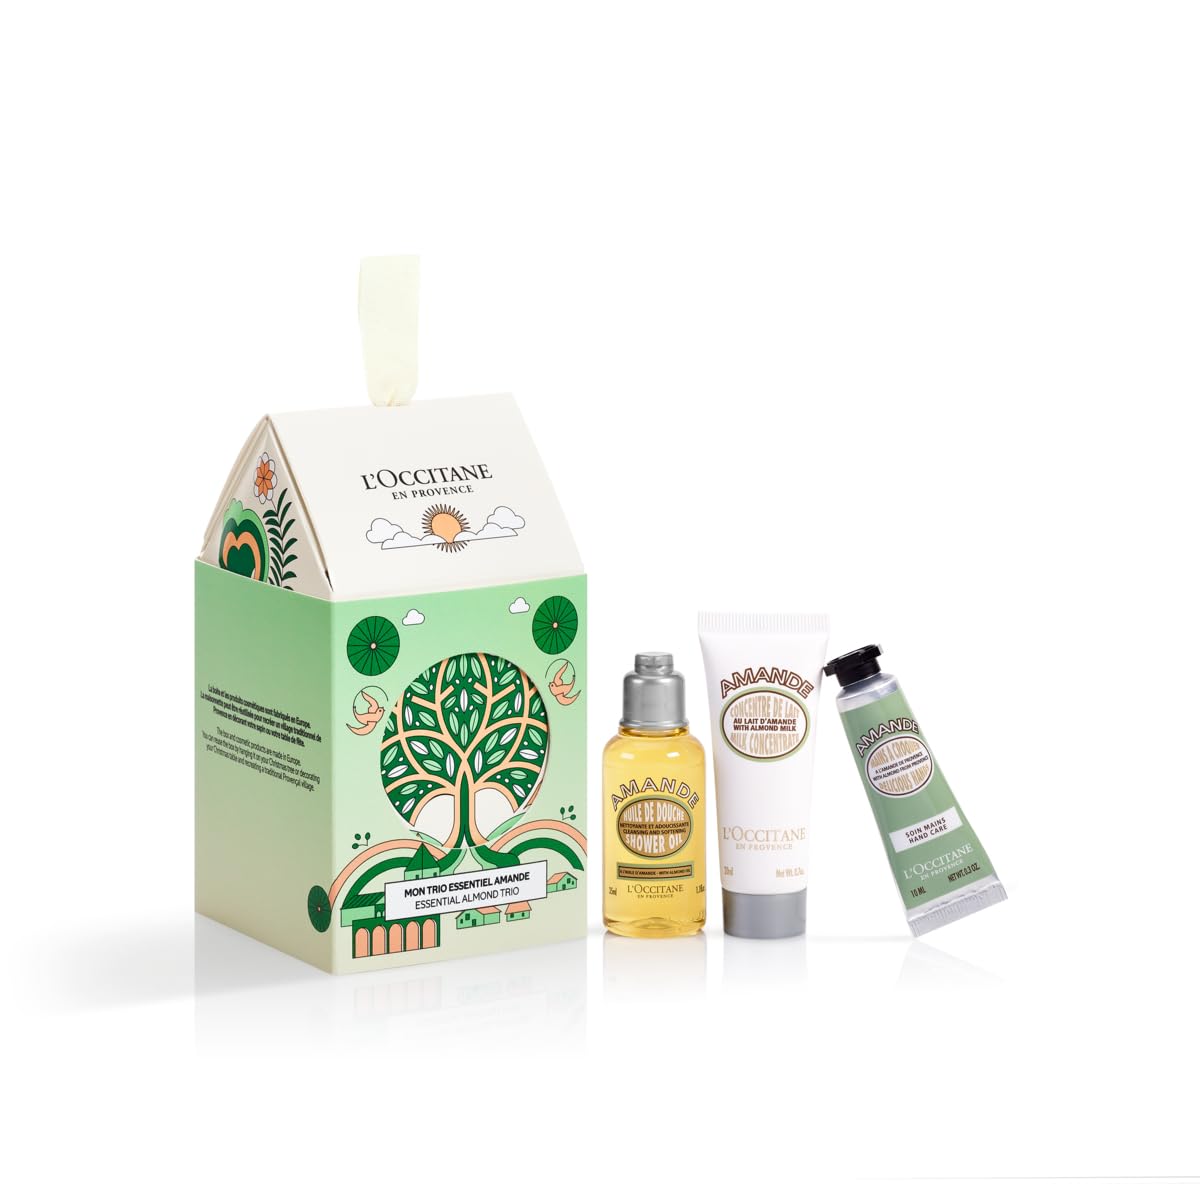 L'Occitane 3-Piece Holiday Almond Ornament: Gift Set Includes Travel-Sized Almond Shower Oil, Almond Milk Concentrate and Almond Delicious Hands